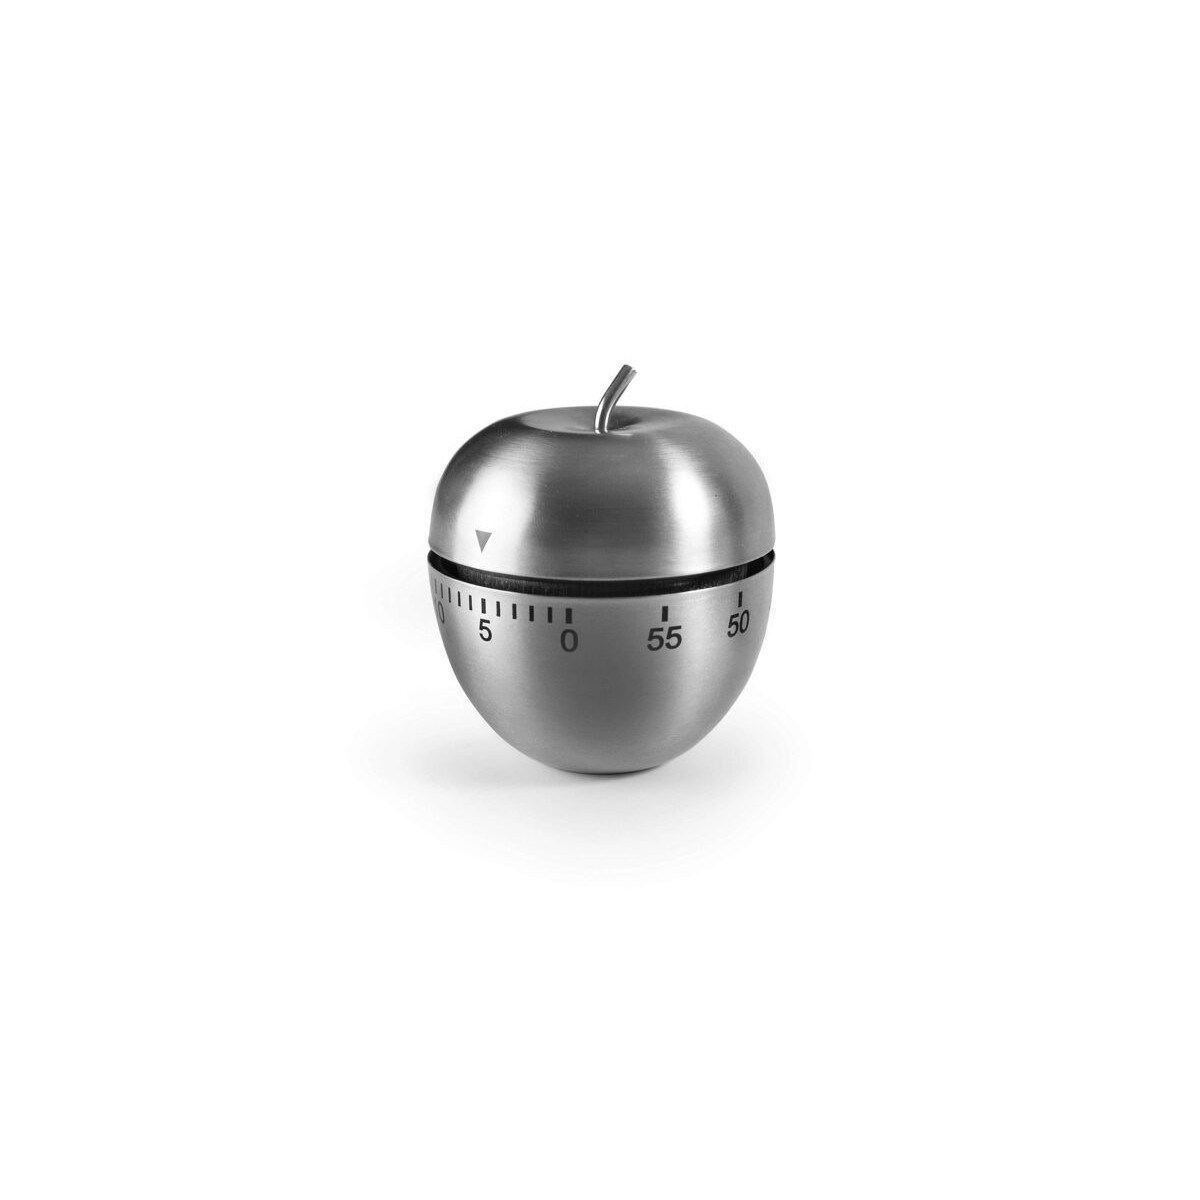 IBILI MINUTERIE MECANIQUE TIMER POMME INOX